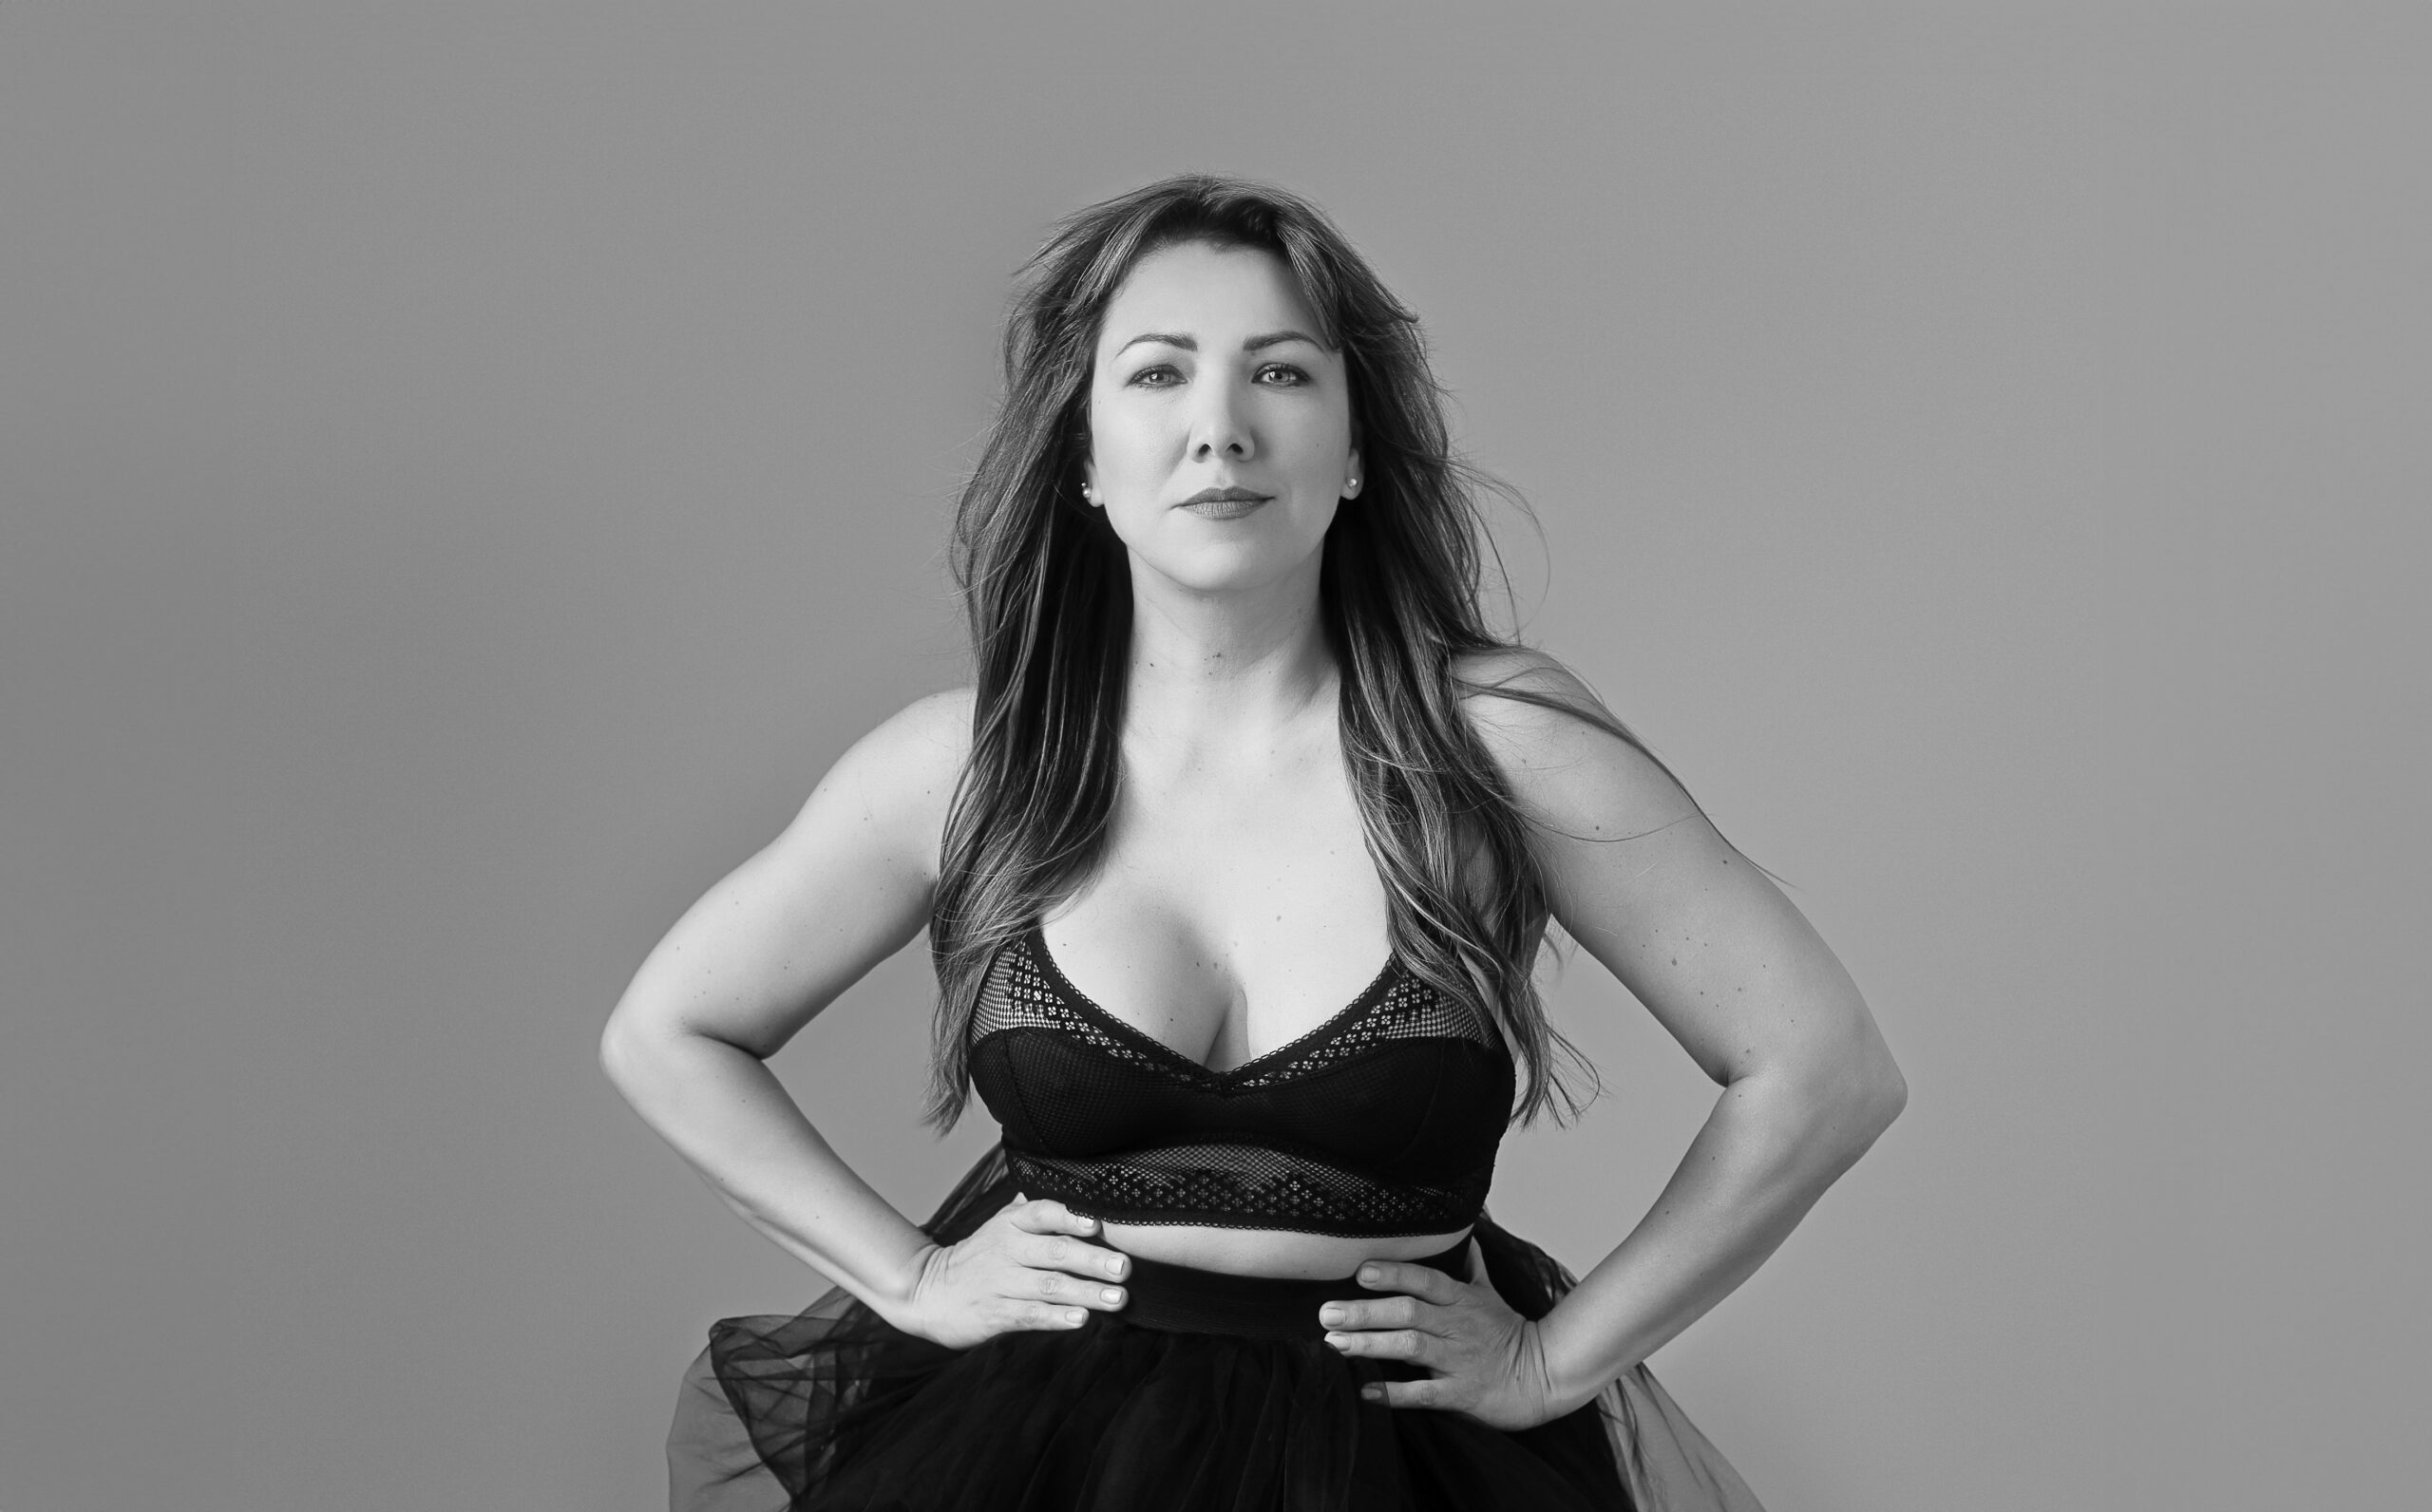 black and white horizontal image of a latino woman doing what is called the power pose for glamour photoshoots